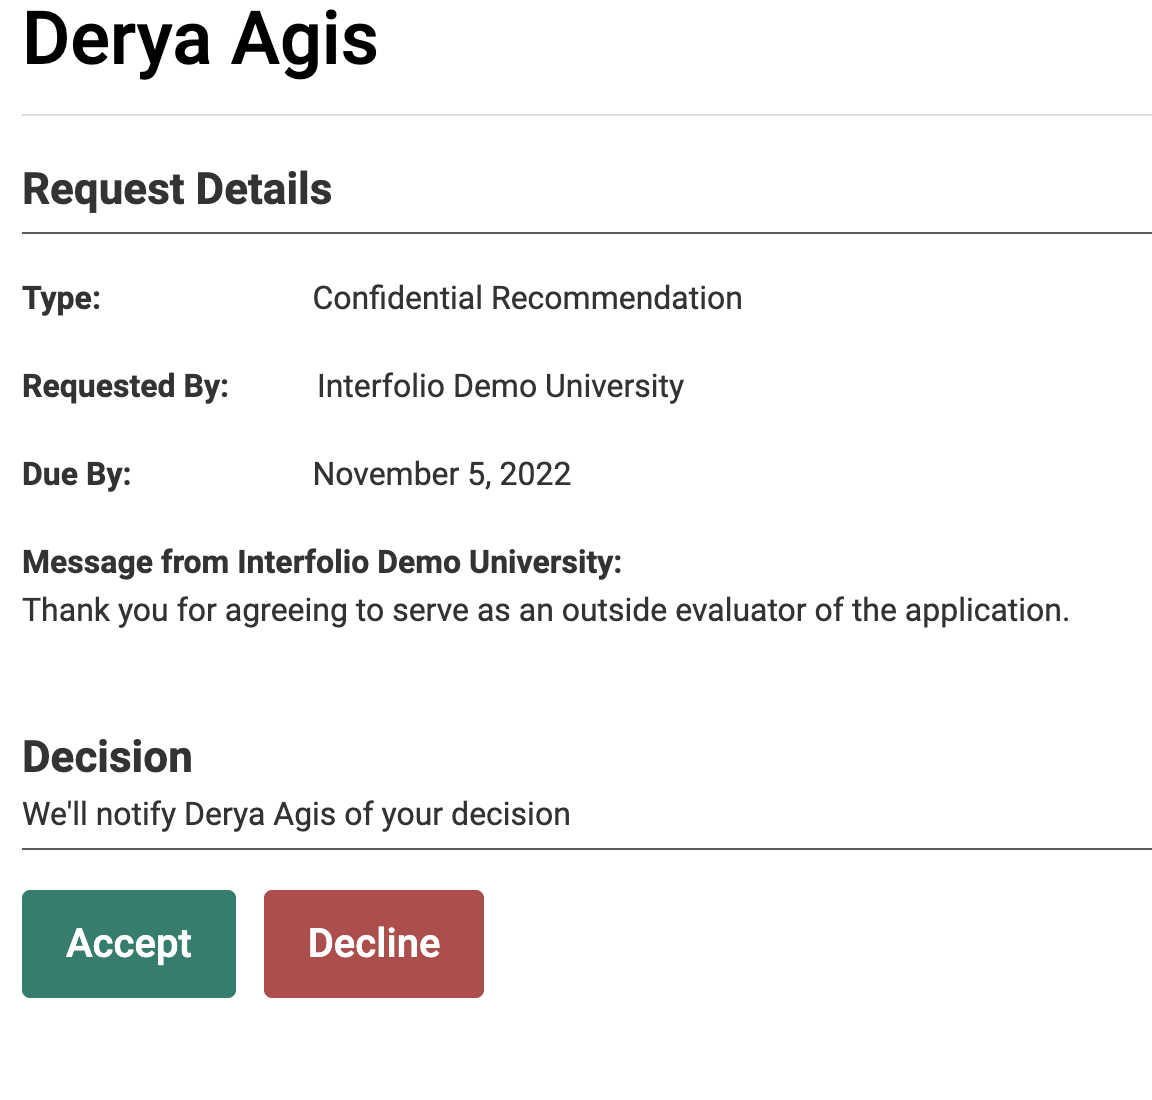 Request Details page displays with Type, Requested By, Due By, and Message from requester information displayed with an Accept and Decline button at the bottom below the Decision section